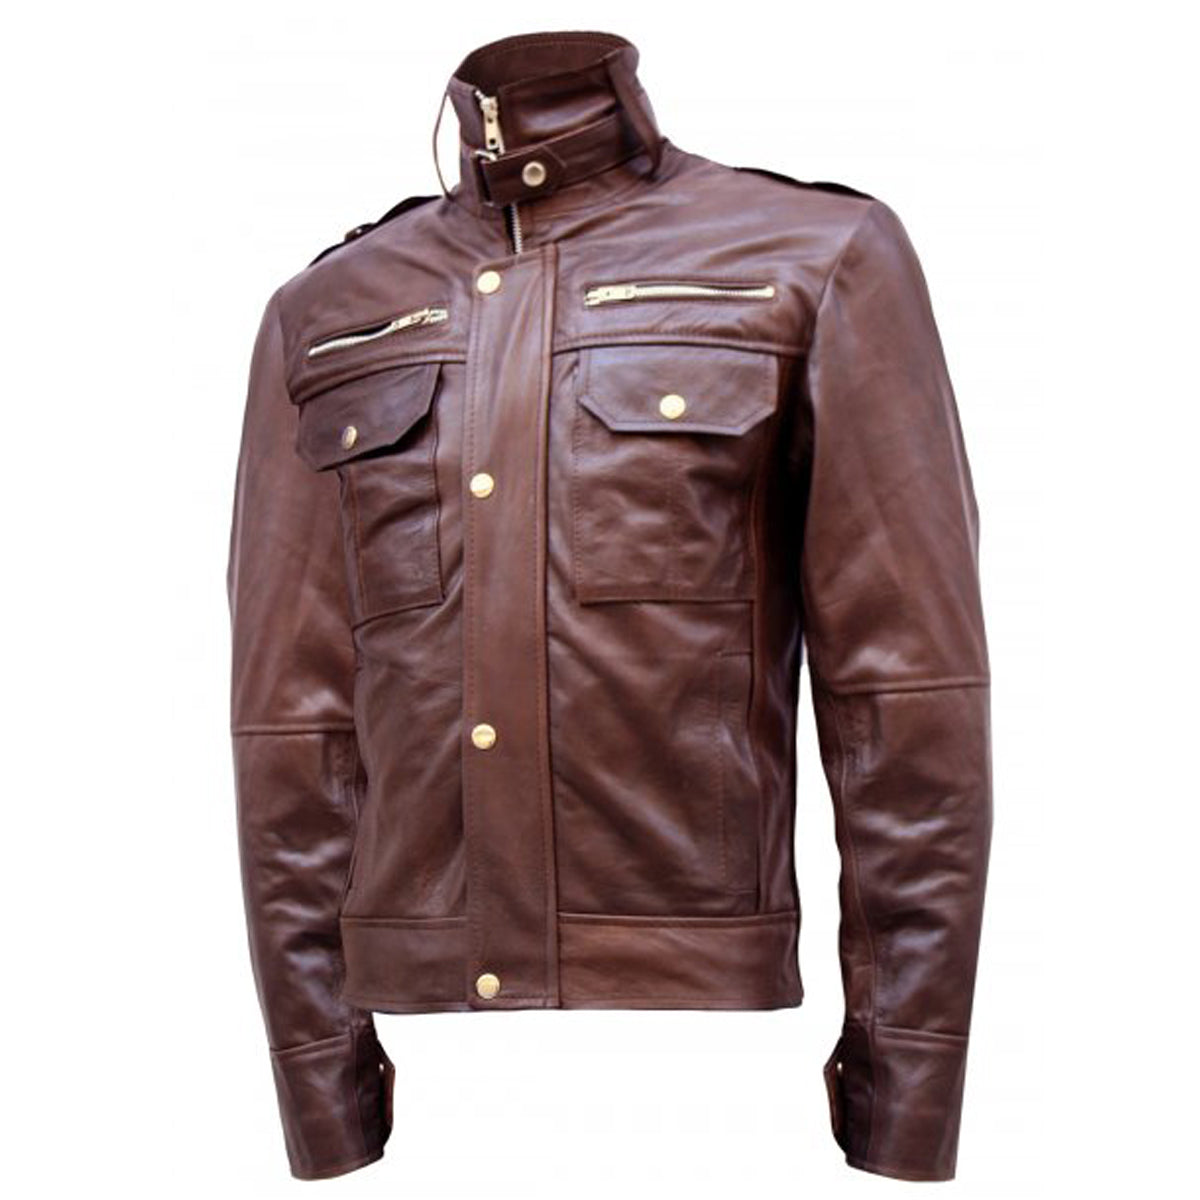 Chocolate Brown Men Leather Jacket - High Quality Leather Jackets For Sale | Dream Jackets On Jackethunt